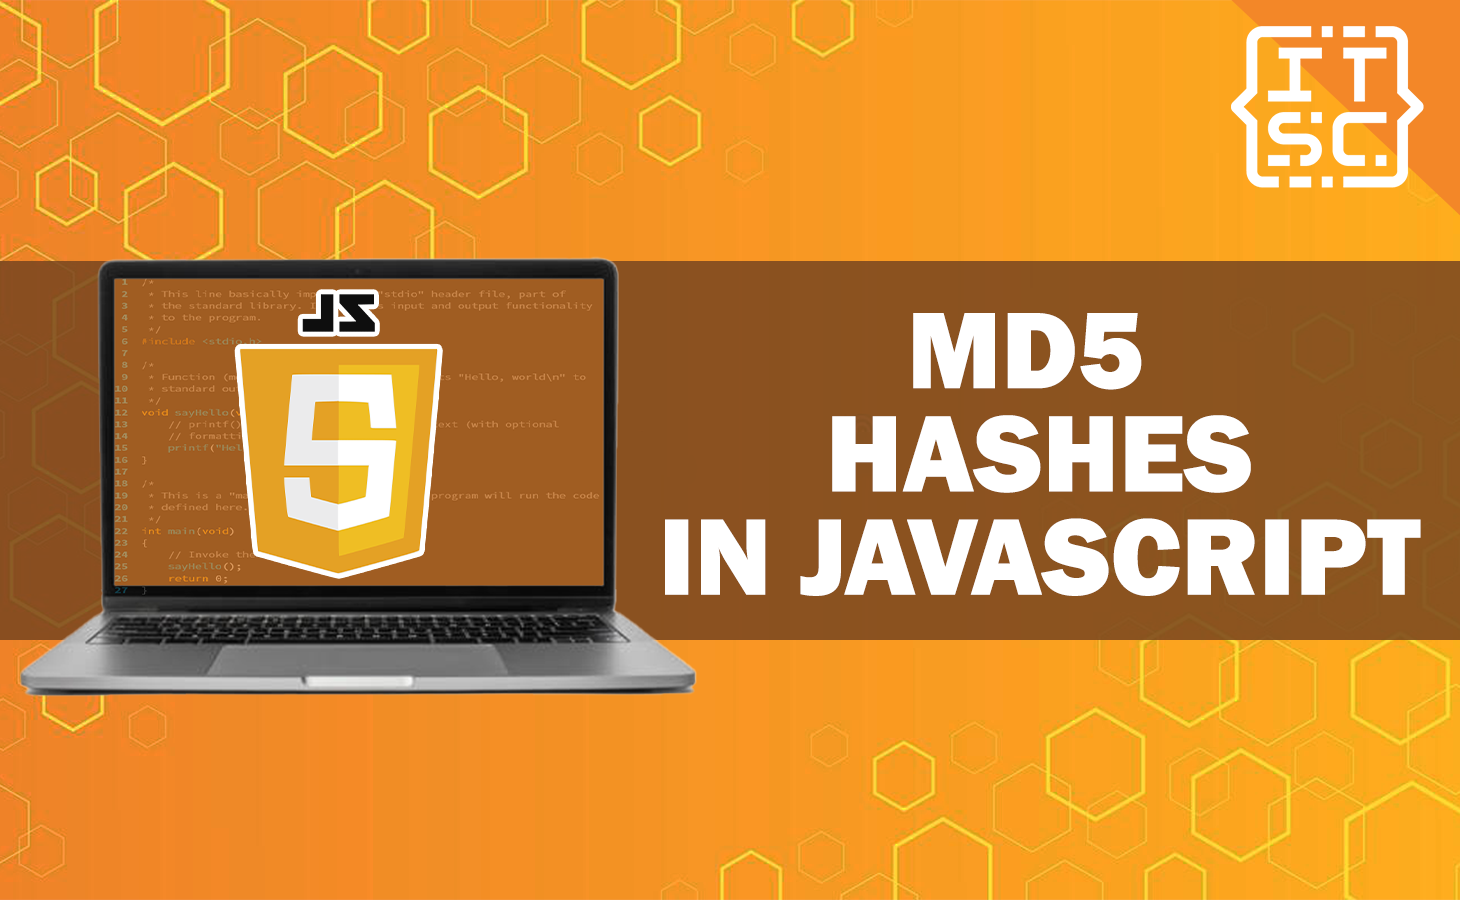 MD5 hashes in JavaScript